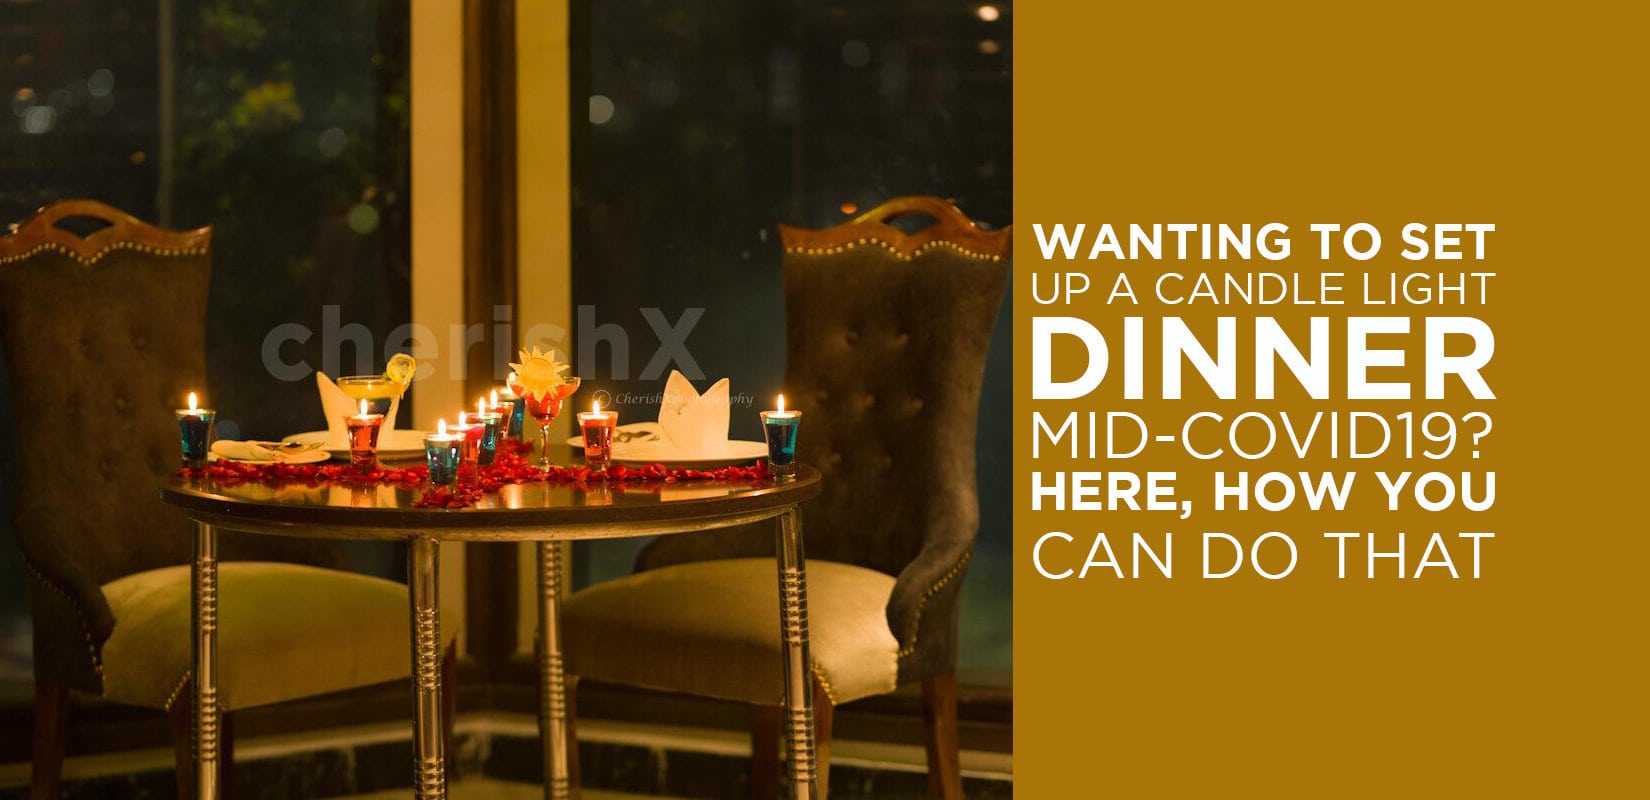 Wanting to Set Up a Candle Light Dinner Mid-Covid19? – Here, How You Can Do That